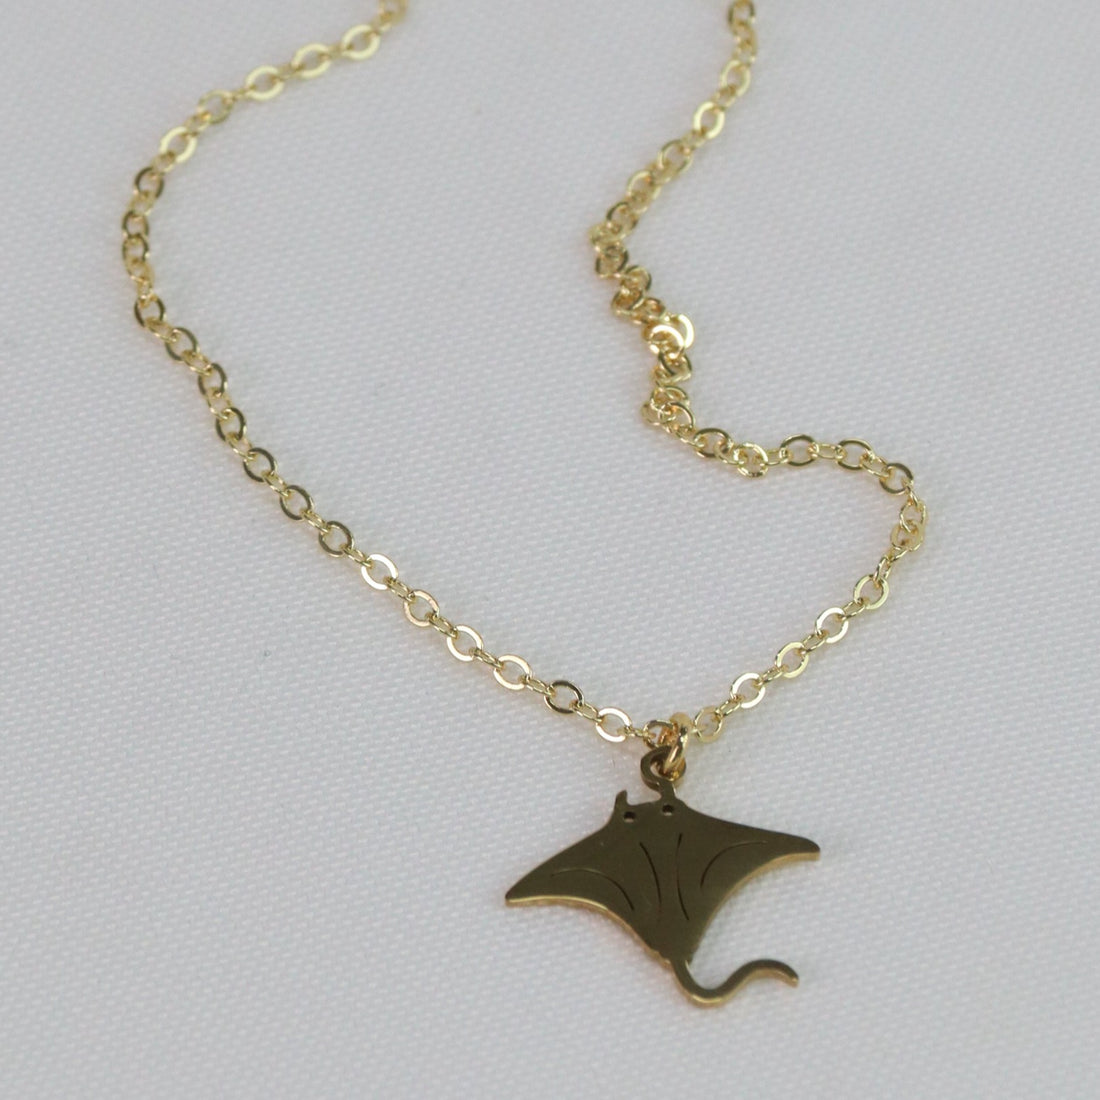 Manta 18K Gold Plated or Stainless Steel Pendant Chain